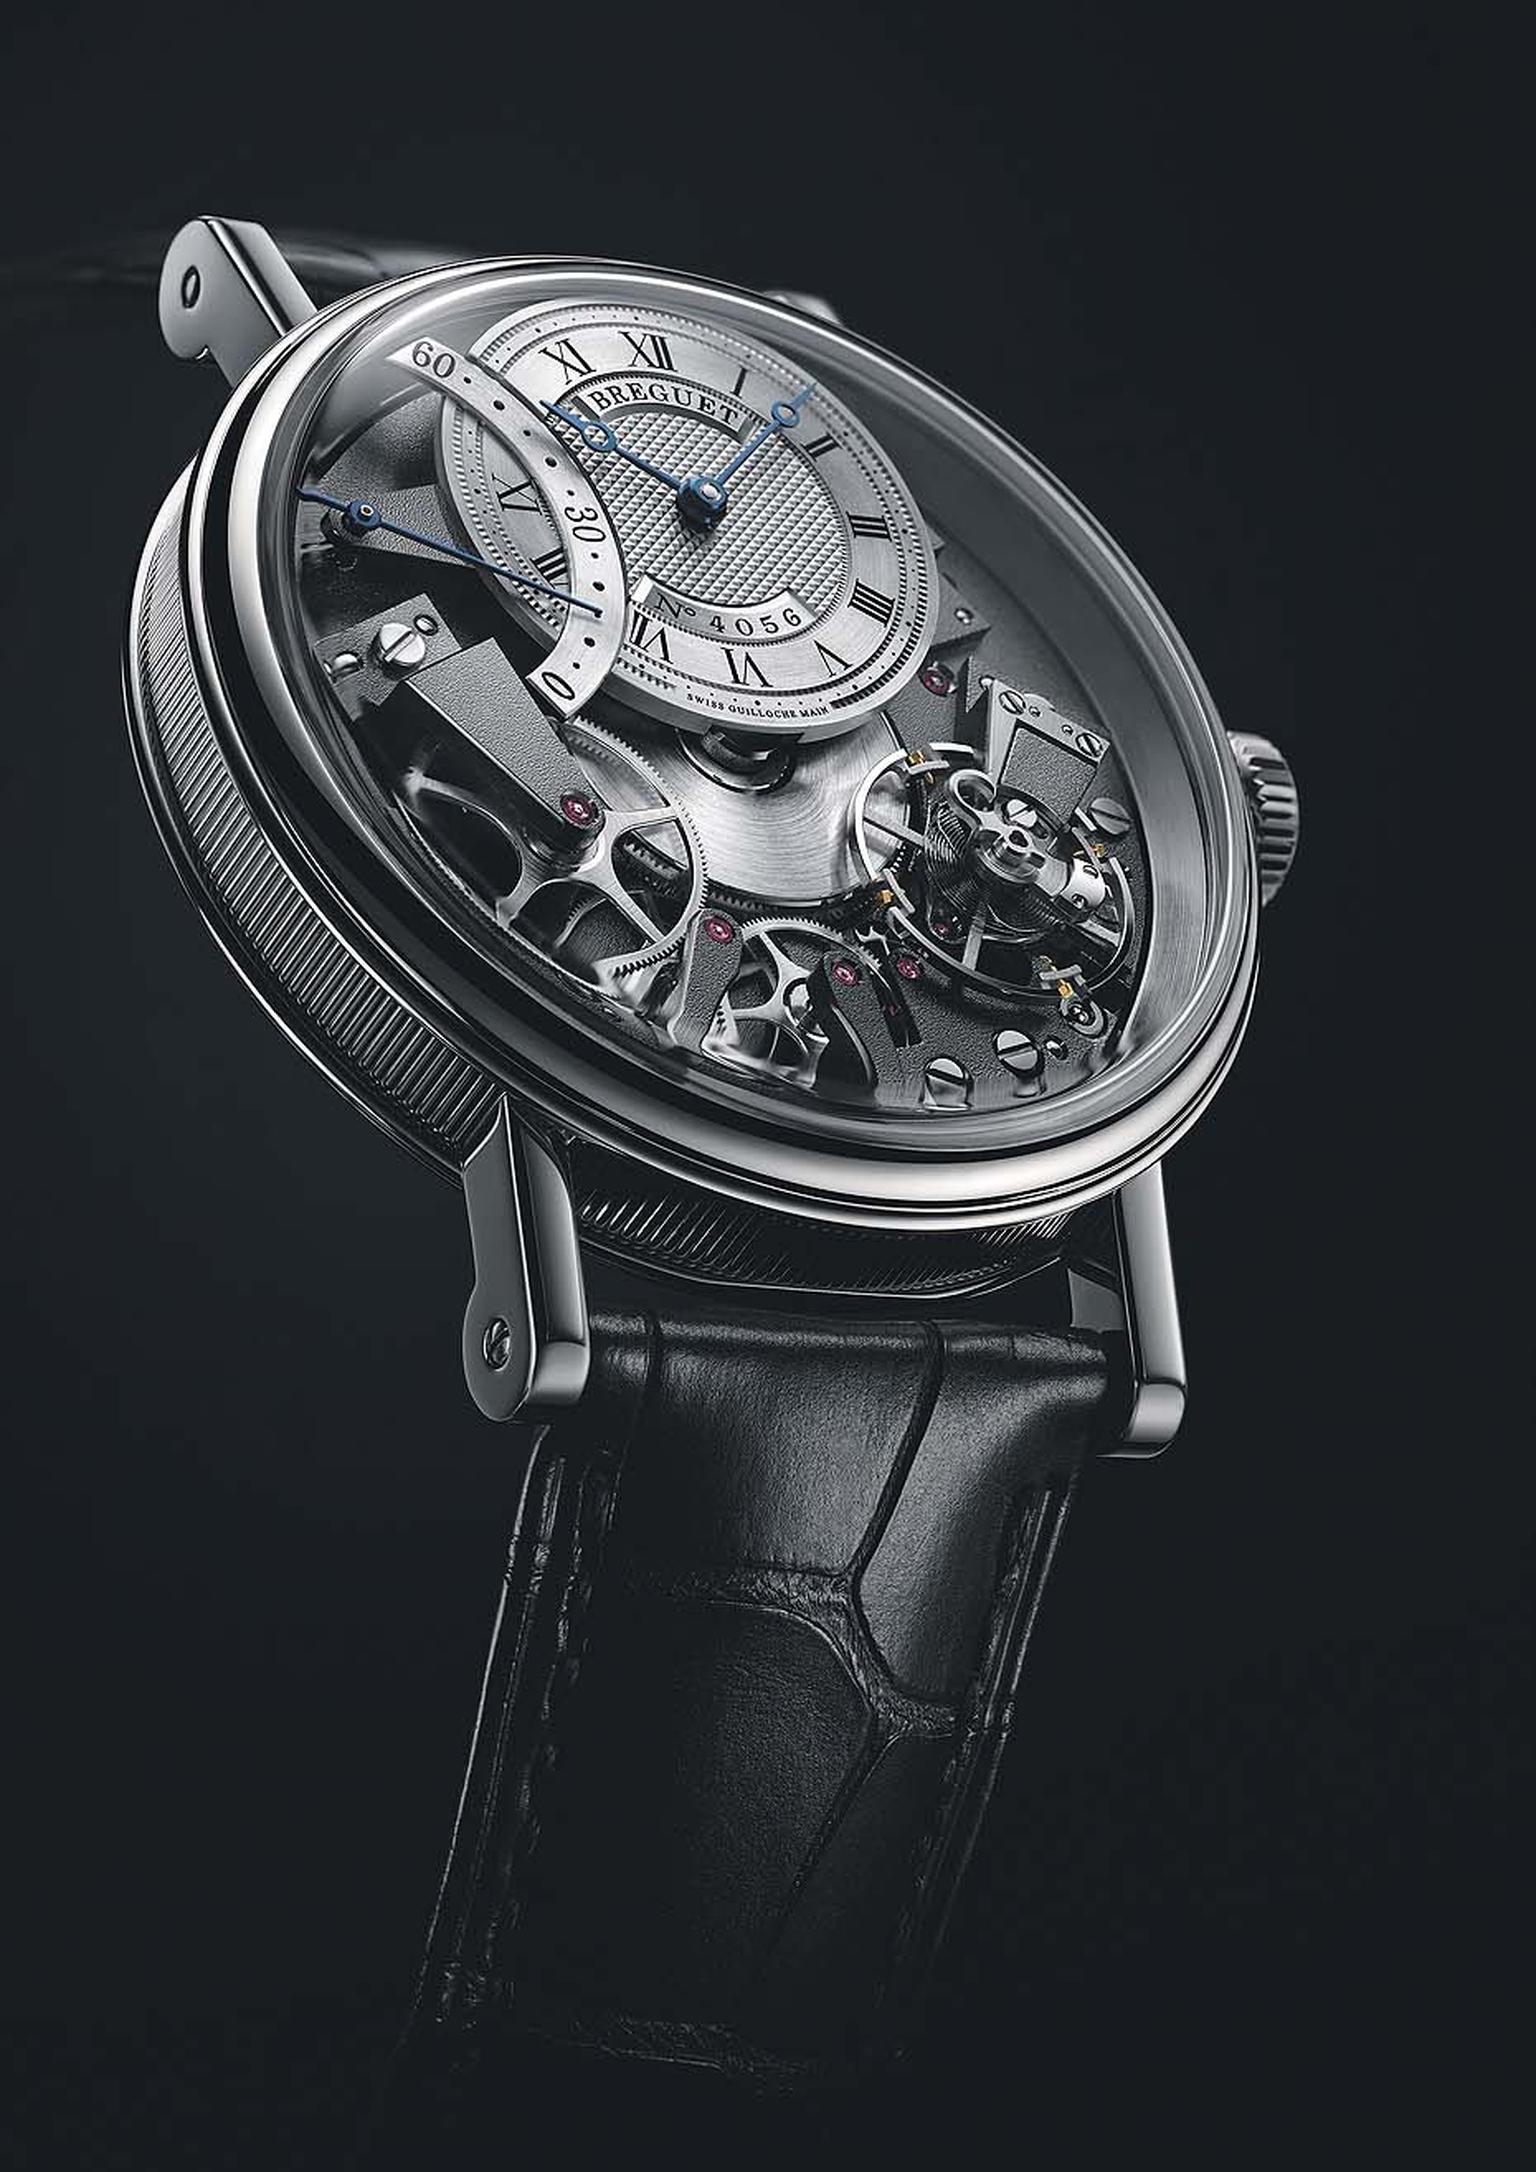 Breguet watches Tradition Automatique Seconde Rétrograde 7097 is inspired by Abraham-Louis Breguet's tact watches, which allowed the wearer to read the time by touch alone. With its openworked dial, nothing is left to the imagination, and the bridges, whe